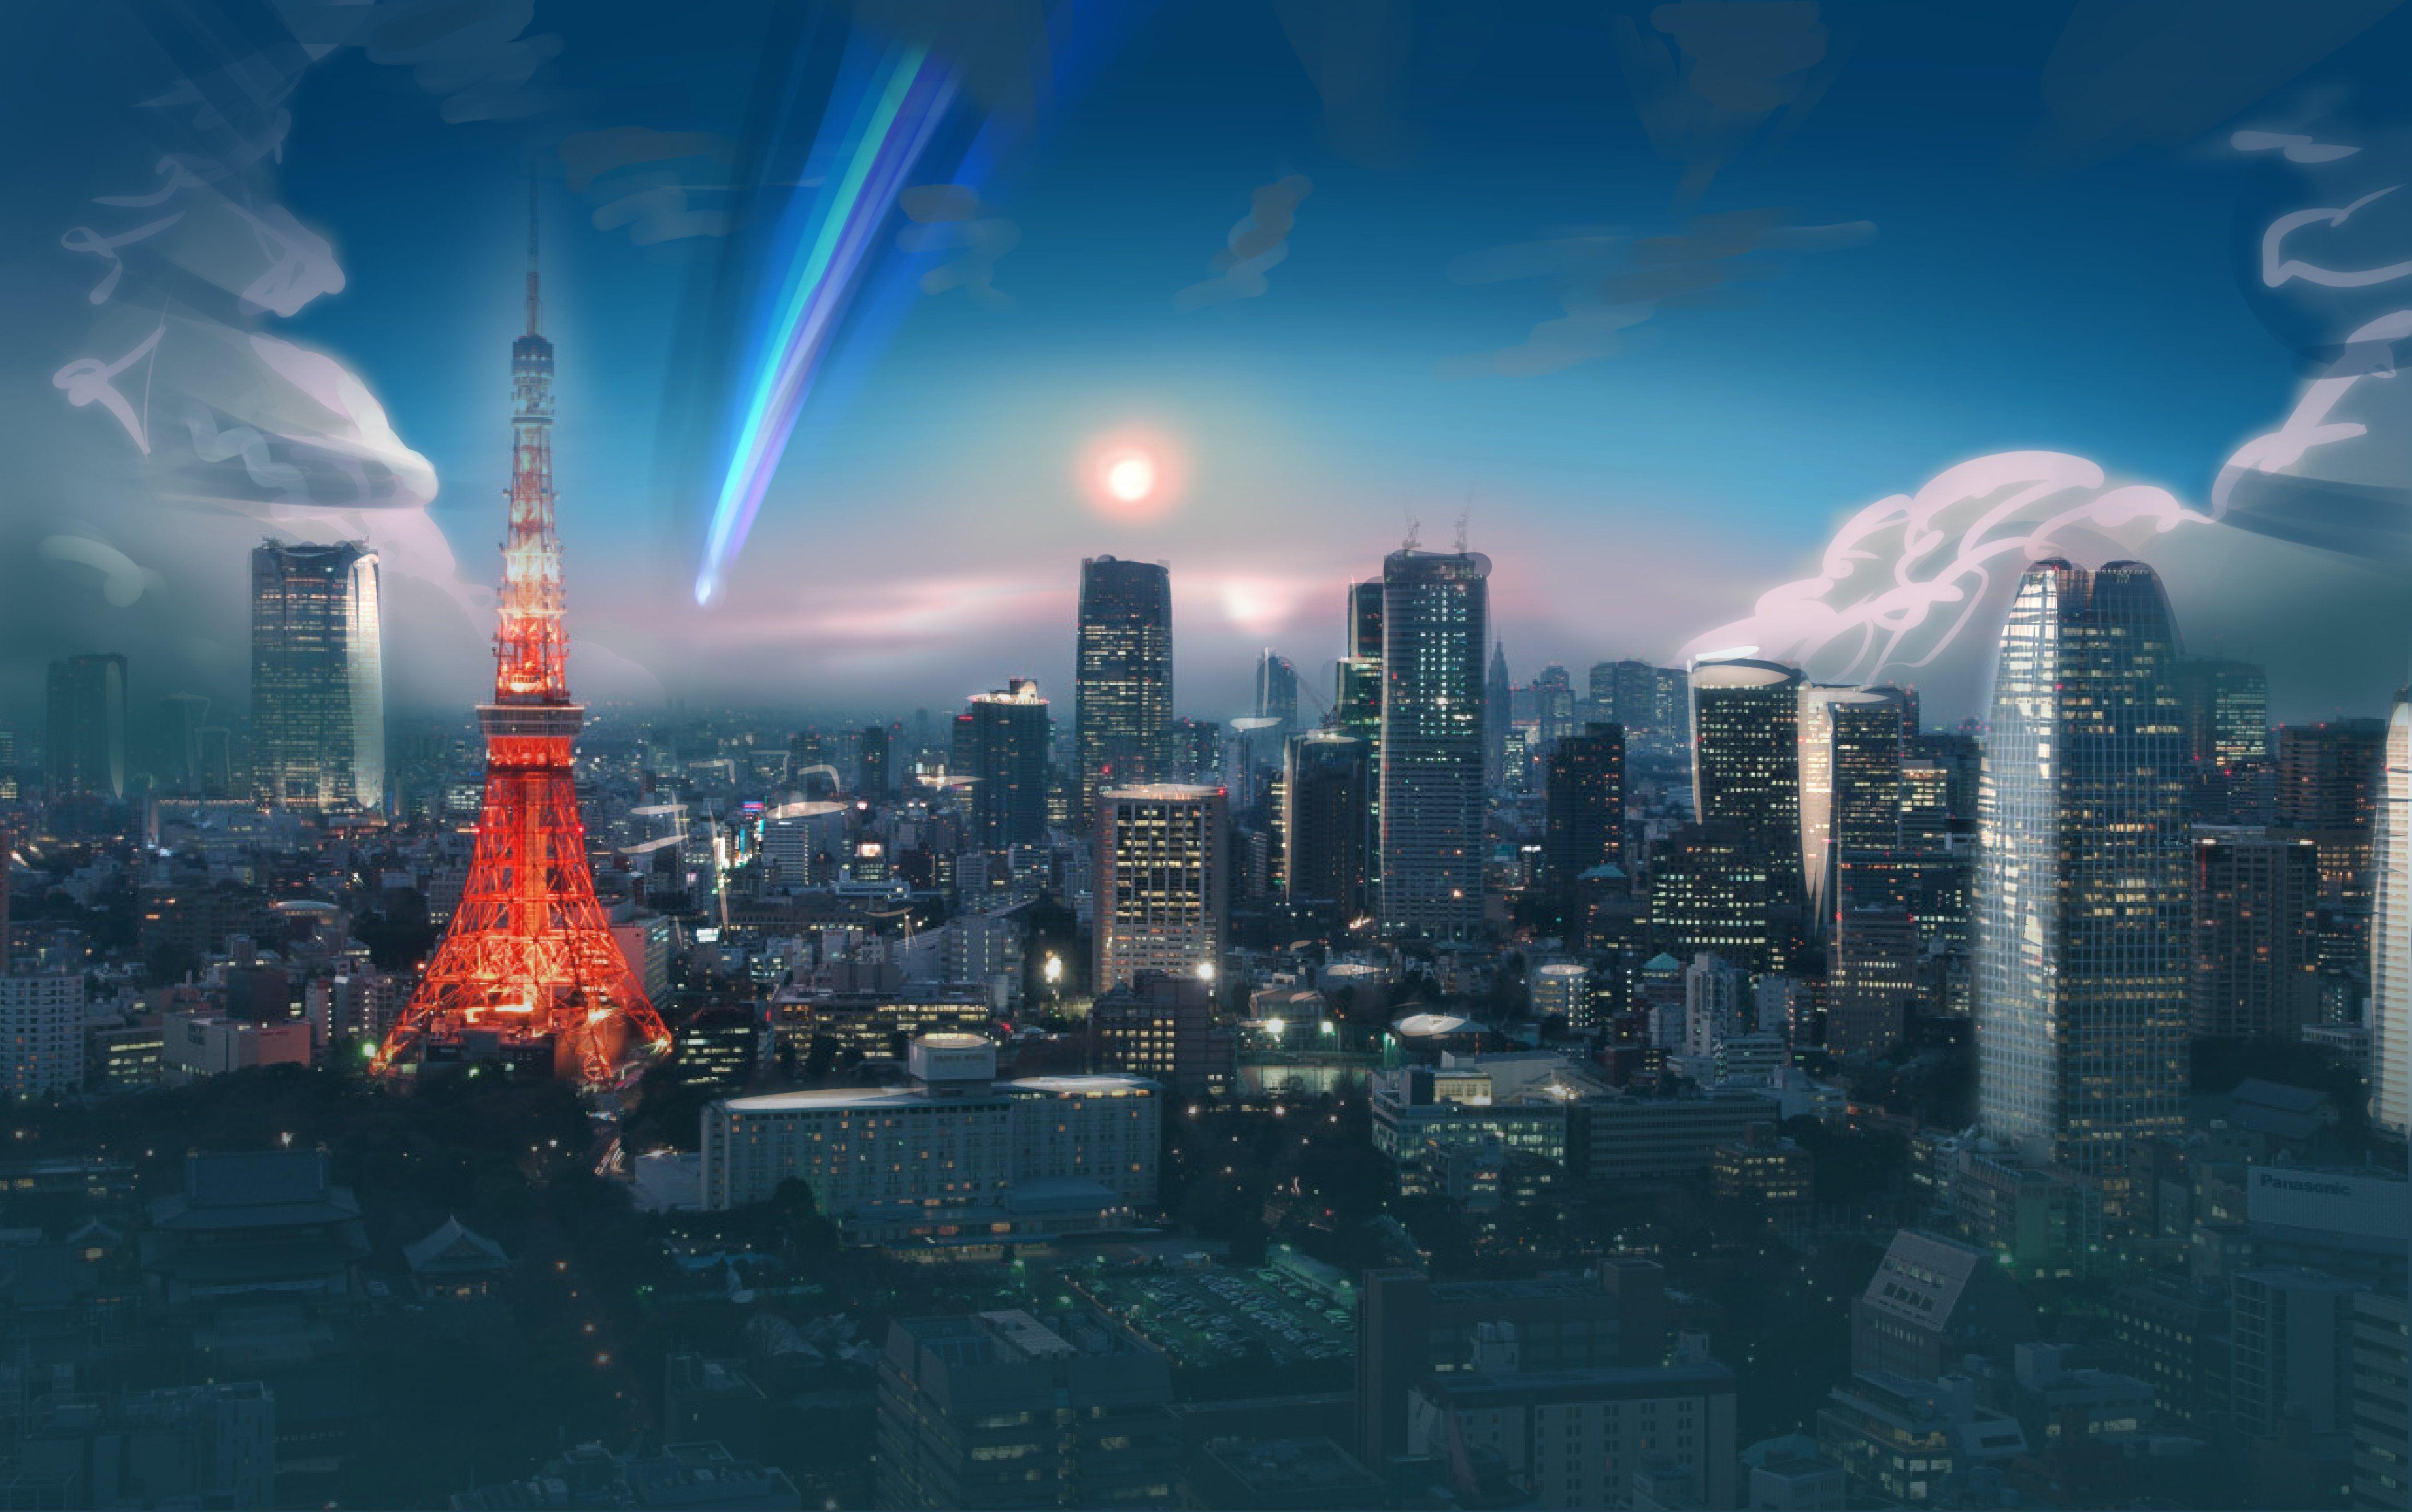 Your Name 4k HD Wallpapers - Top Free Your Name 4k HD Backgrounds